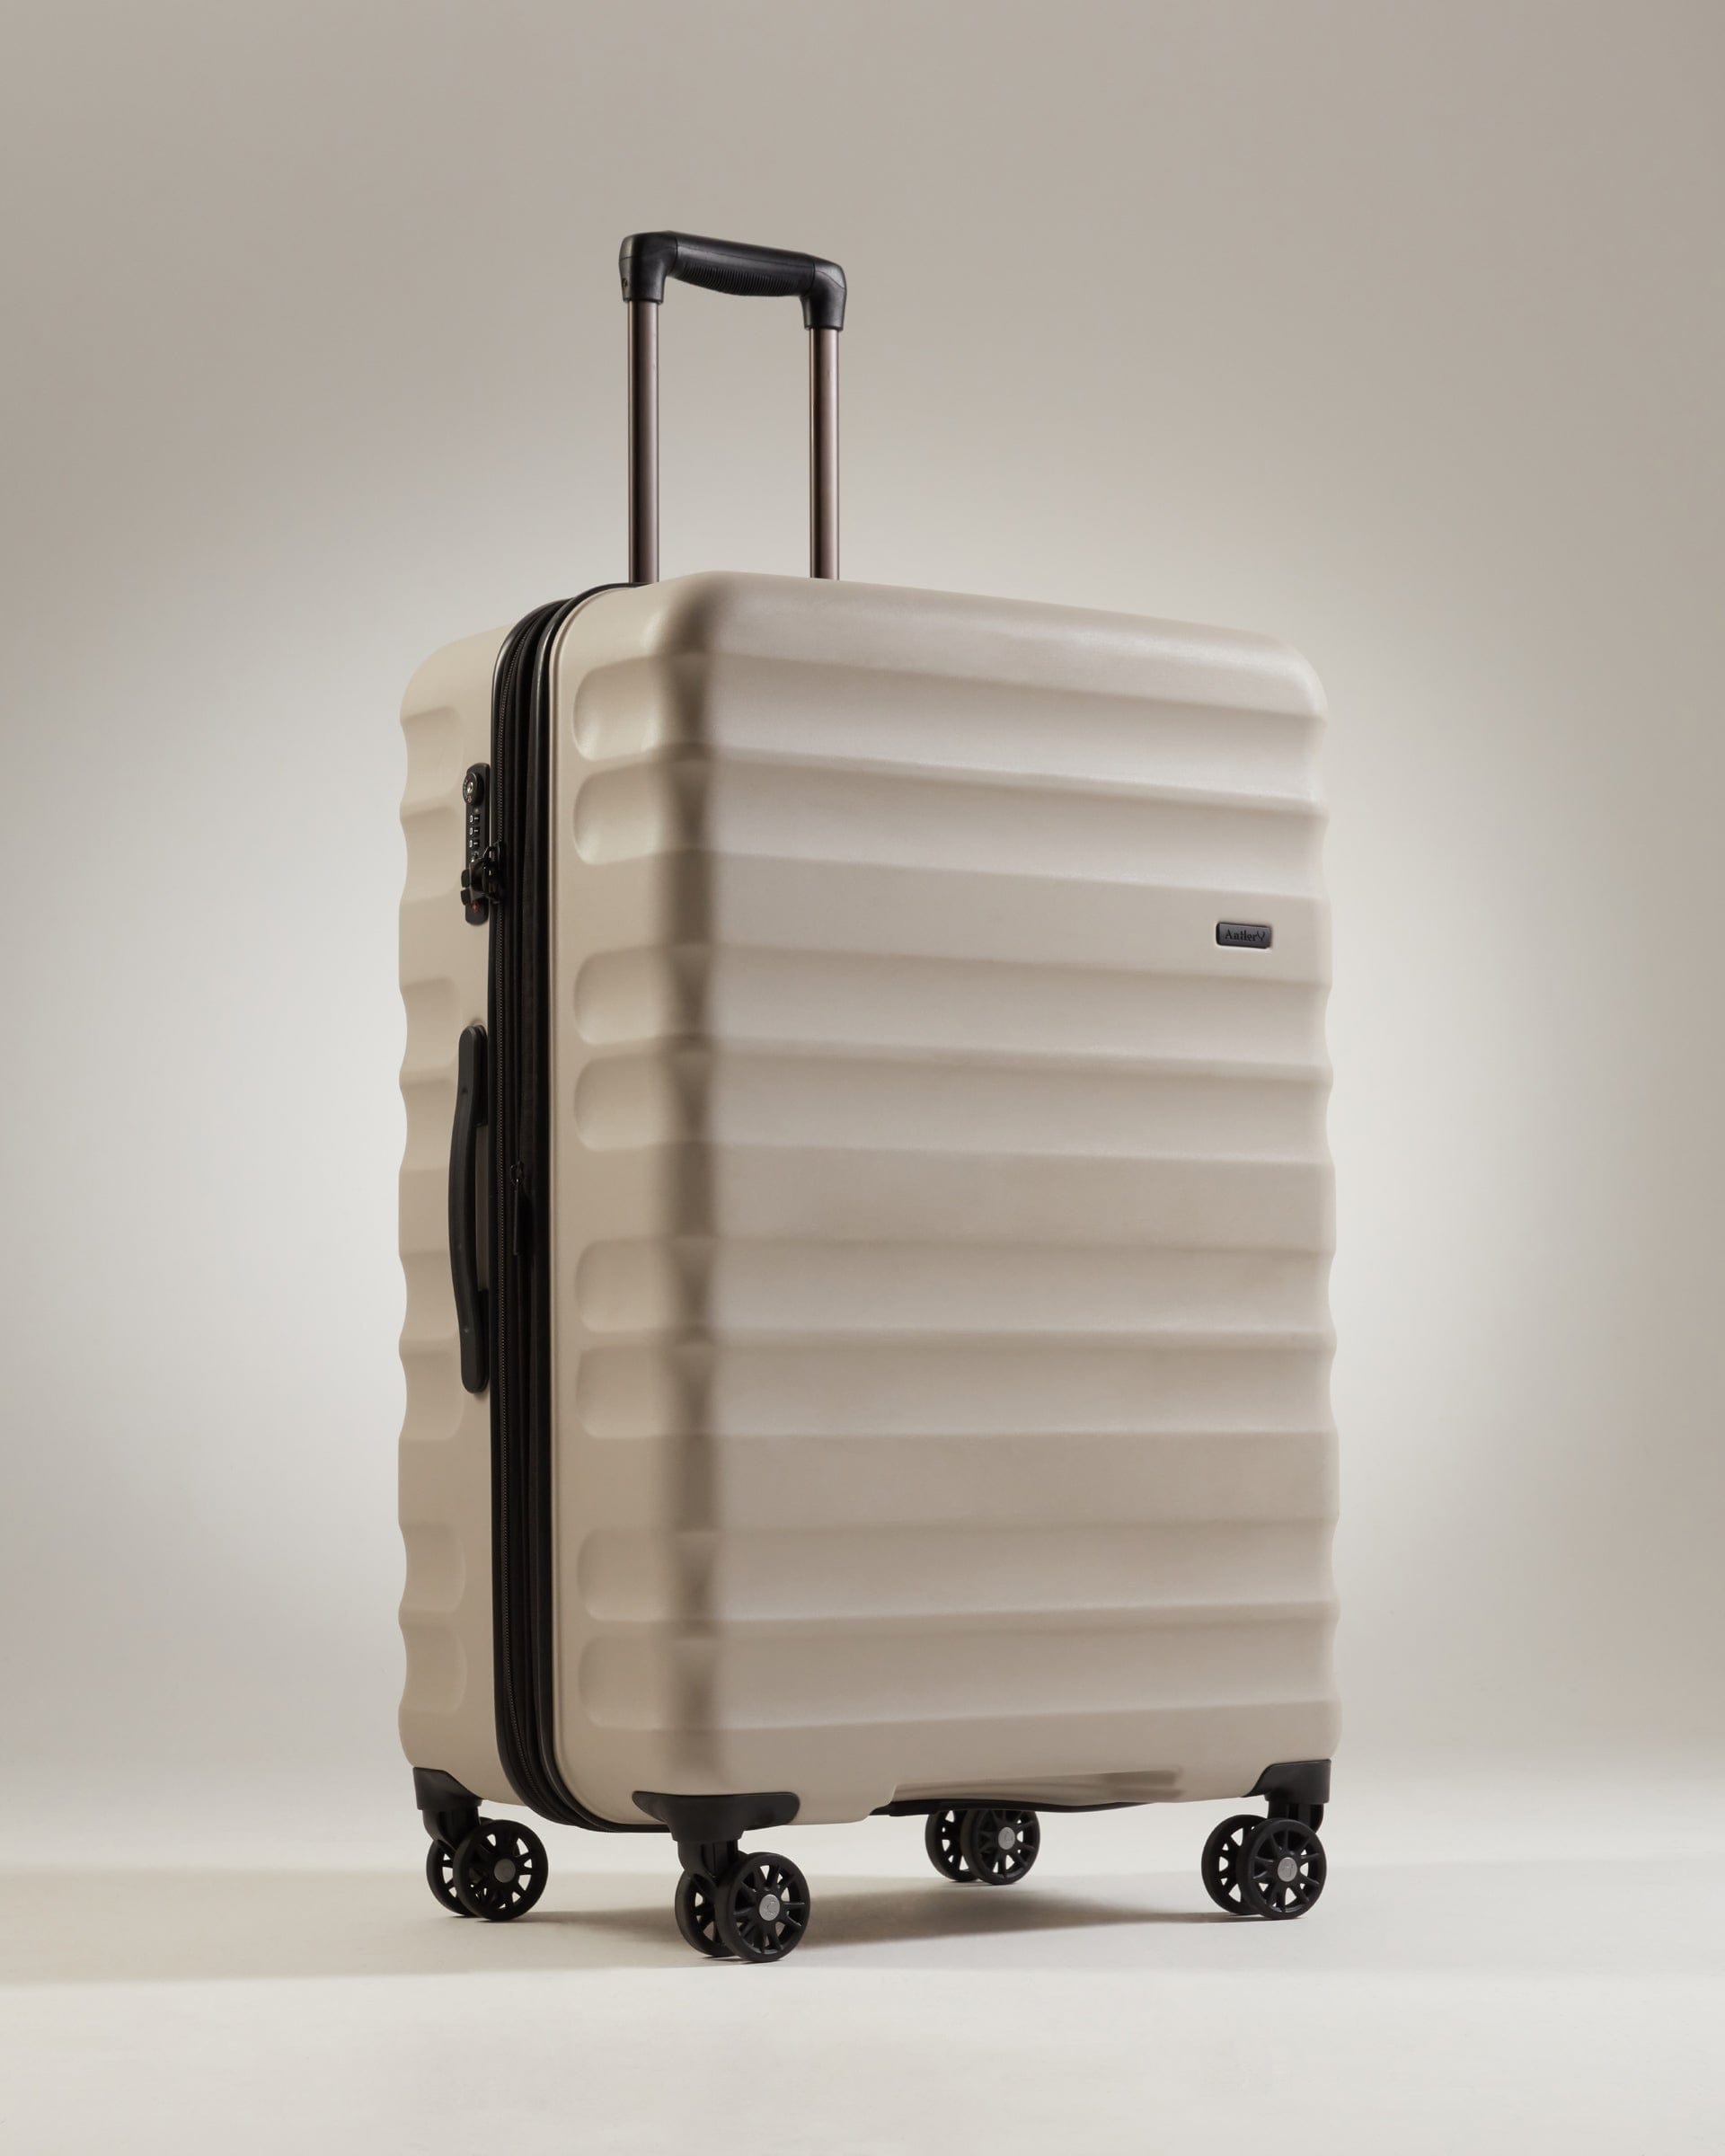 View Antler Clifton Large Suitcase In Taupe Size 34 x 51 x 80 cm information